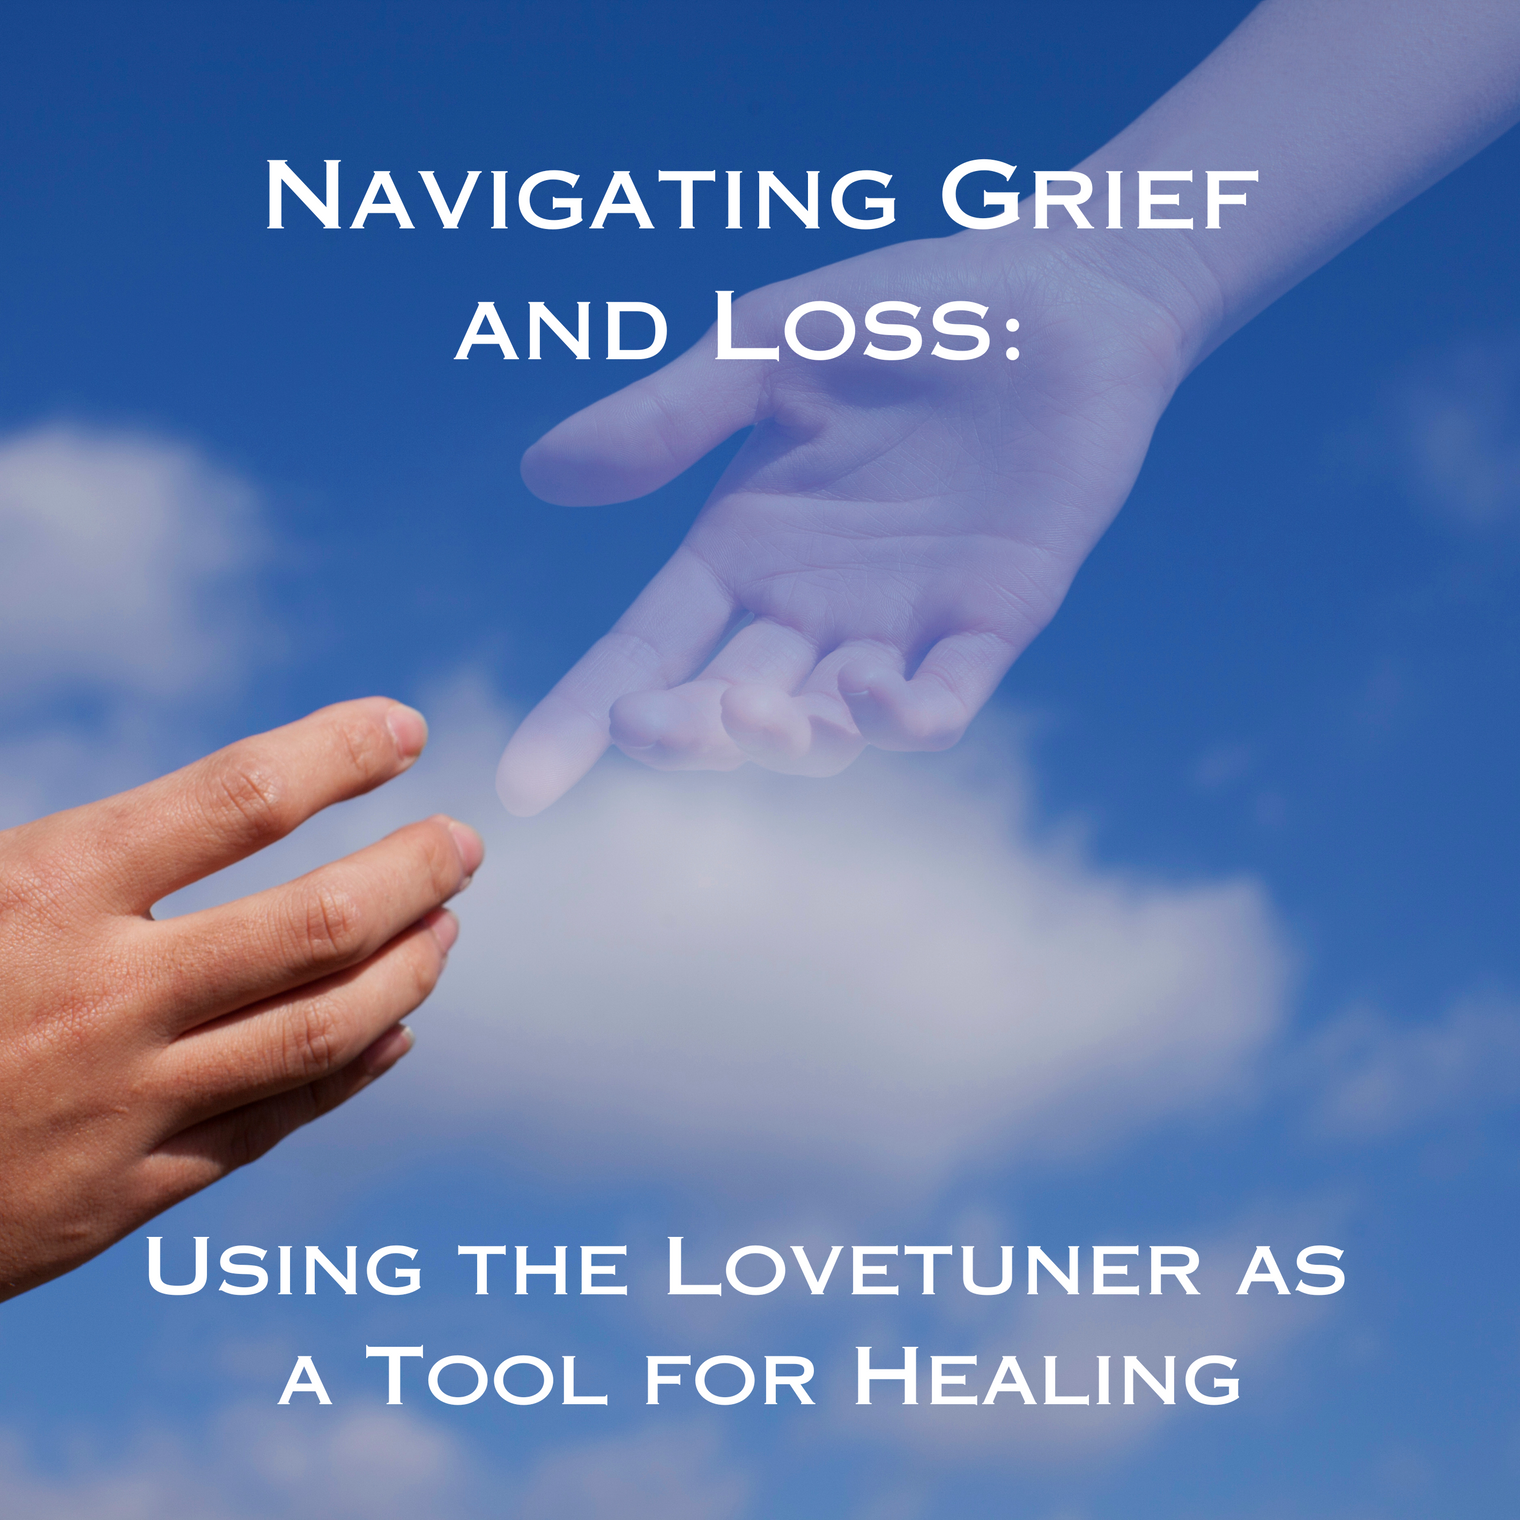 Navigating Grief and Loss: Using the Lovetuner as a Tool for Healing